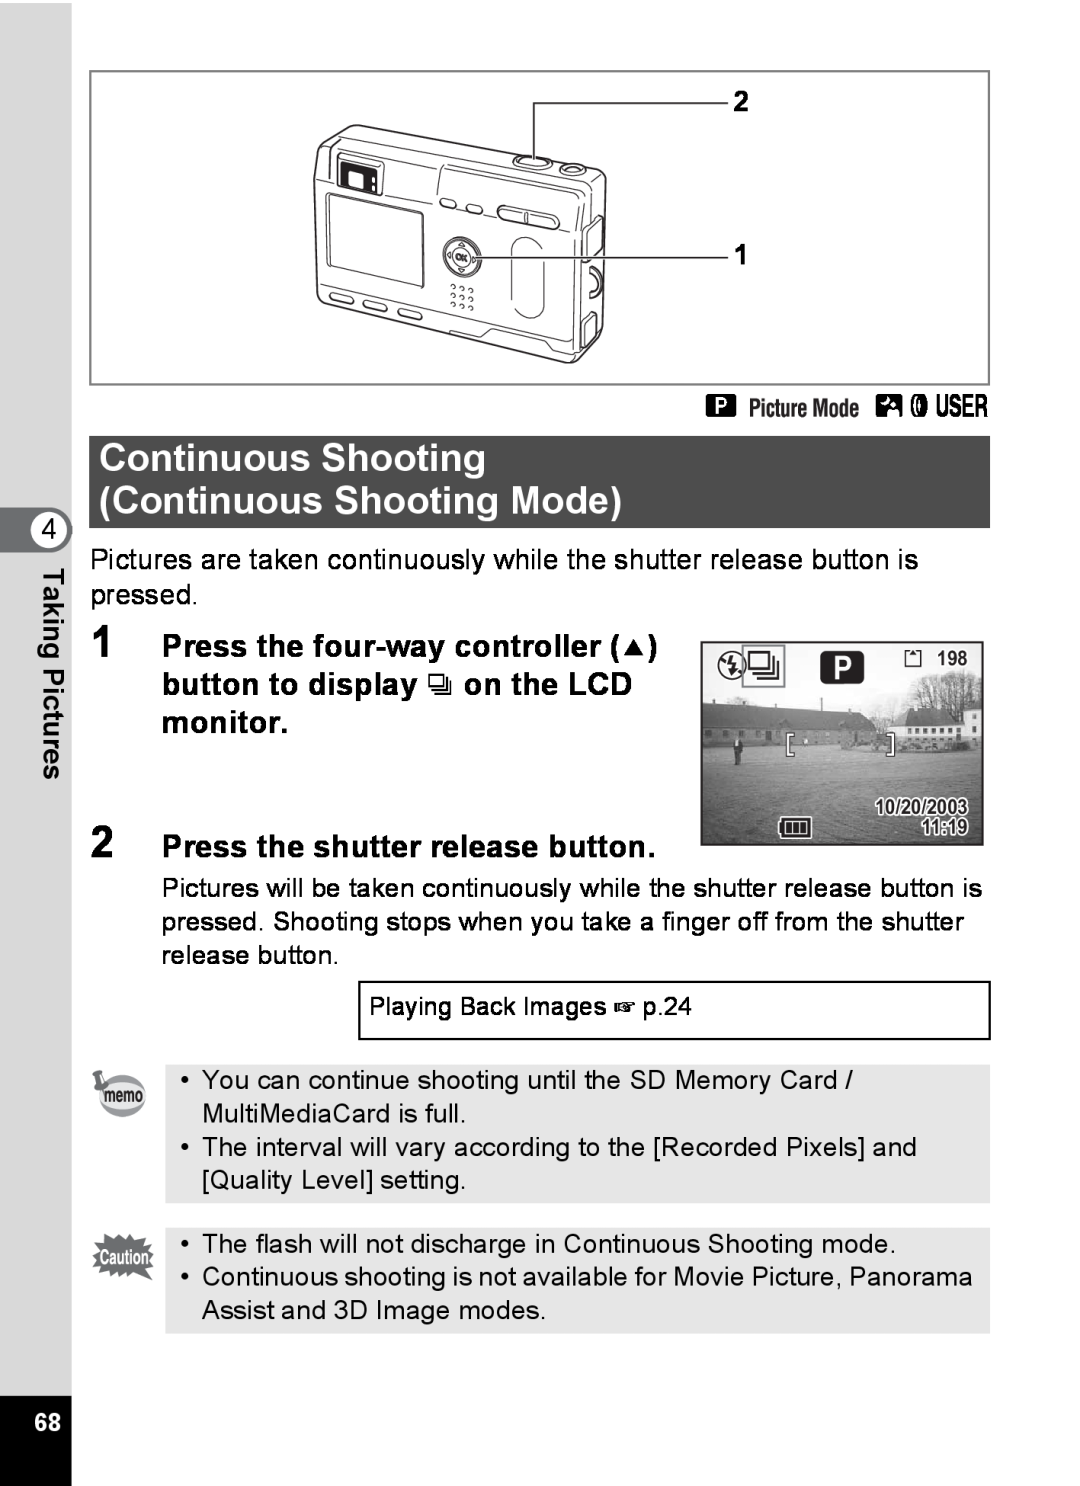 Pentax S4 manual Continuous Shooting Continuous Shooting Mode, button to display j on the LCD, monitor, A Bde 